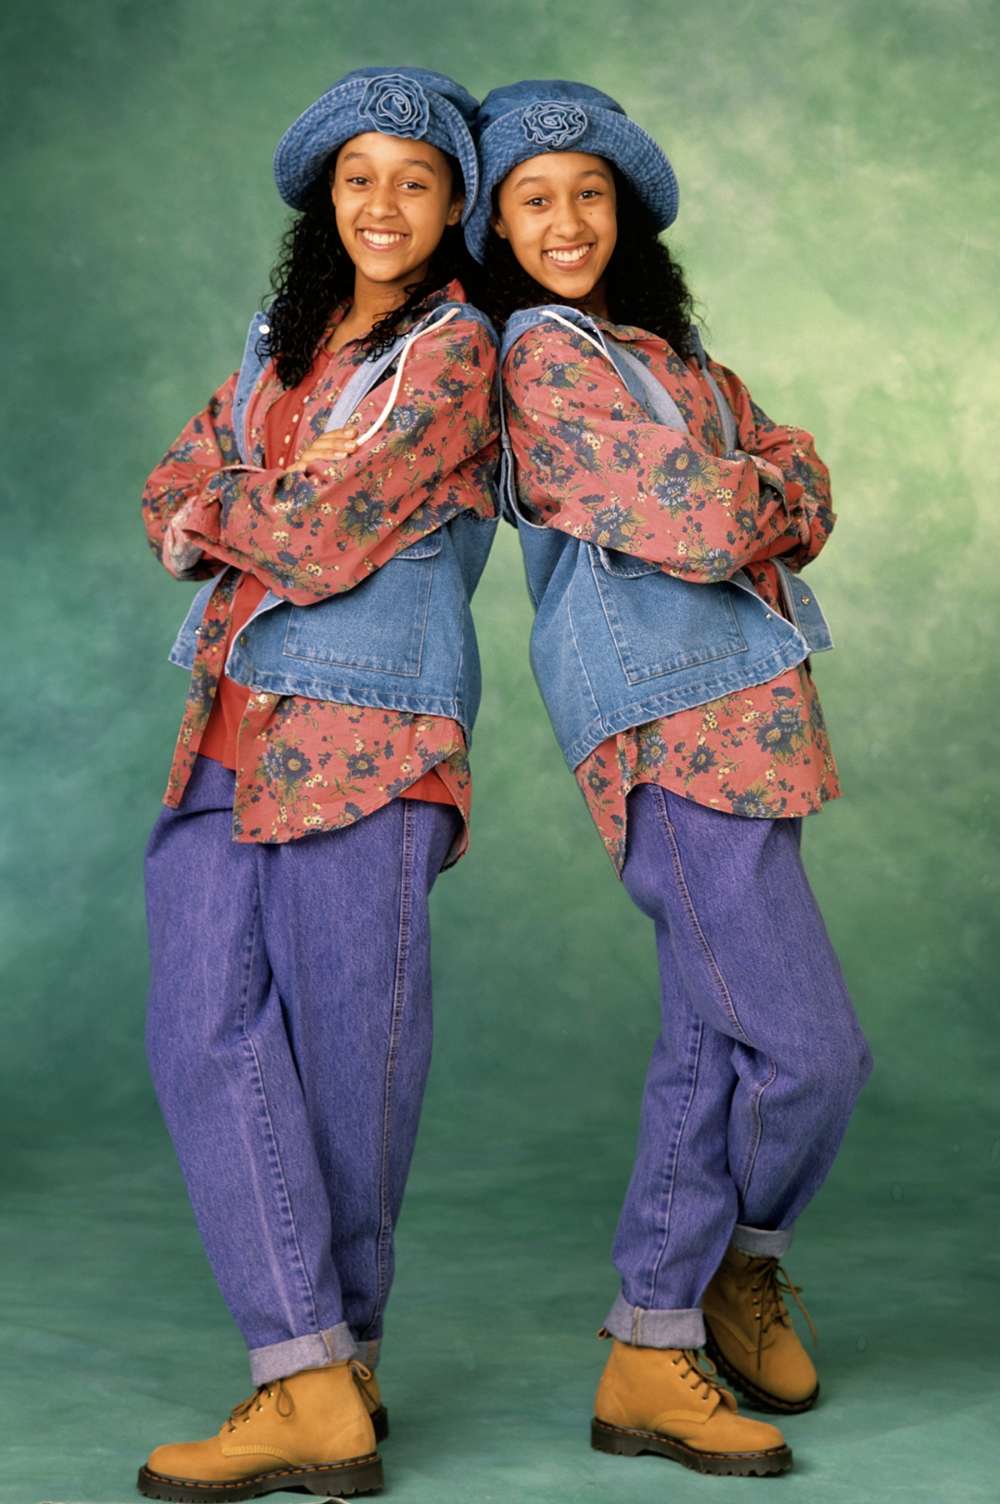 Tia and Tamera Mowry in their show Sister, Sister